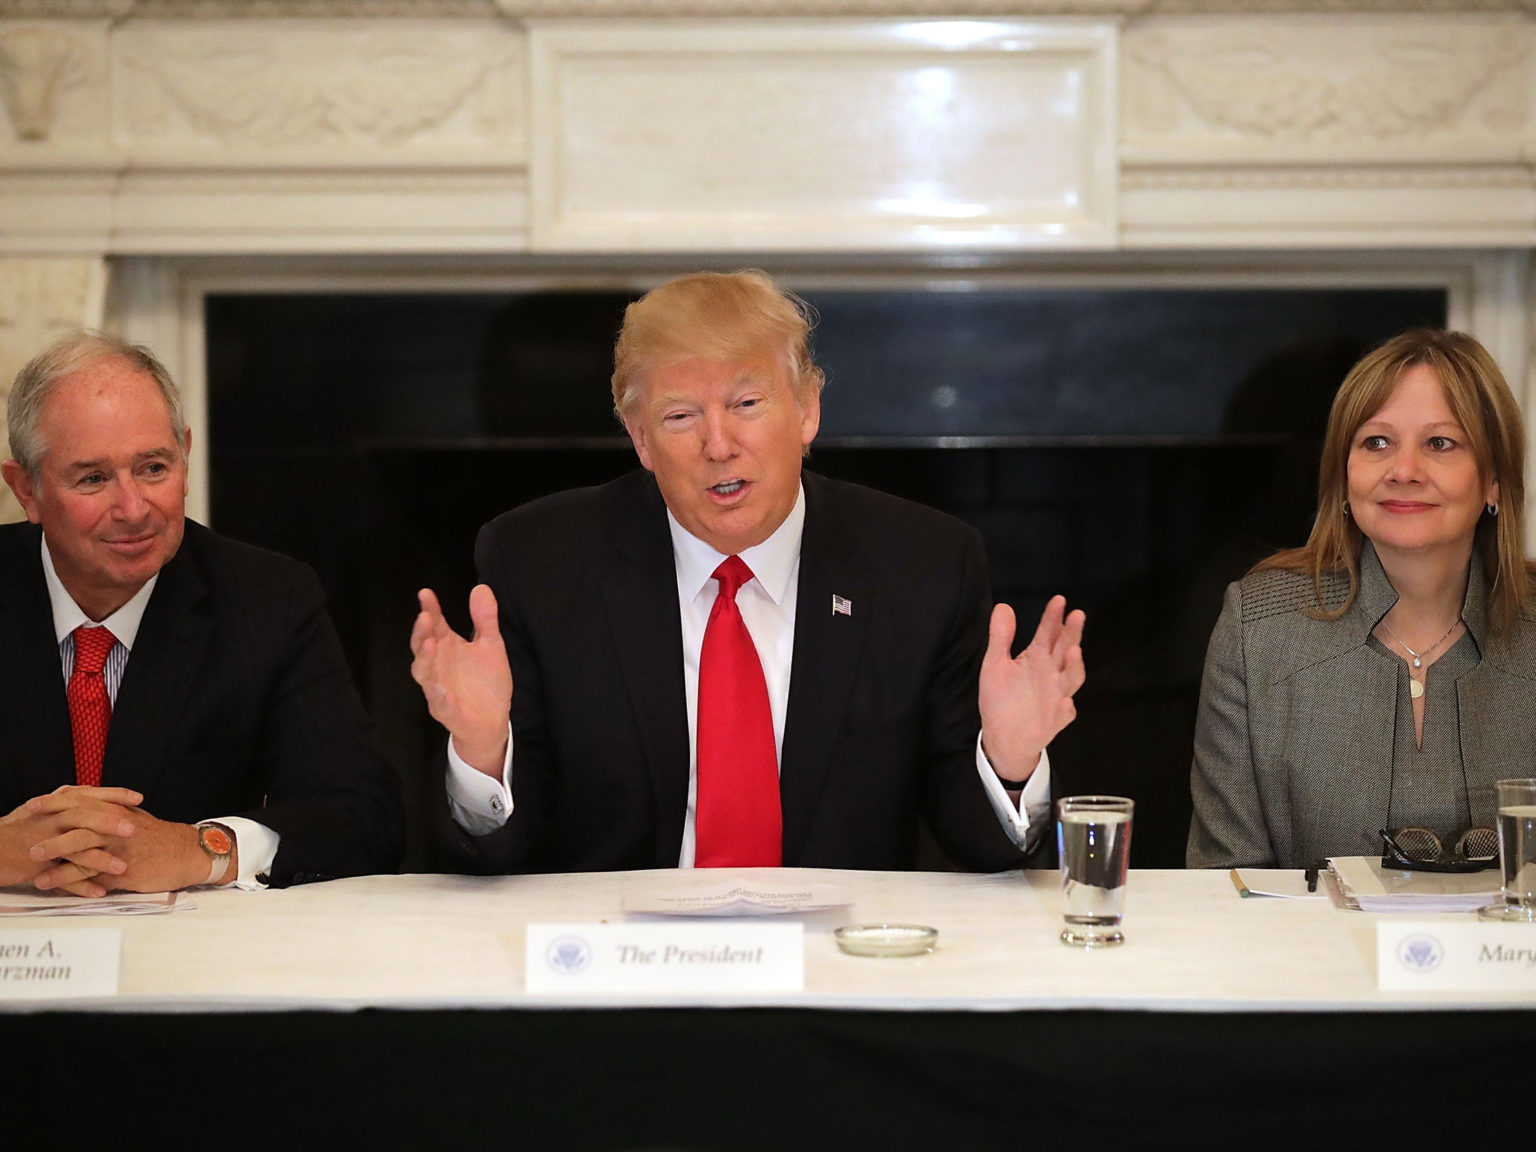 President Donald Trump (center) delivers opening remarks at the beginning of a policy forum with business leaders with General Motors CEO Mary Barra (right) and chaired by Blackstone Group CEO Stephen Schwarzman (left) in 2017. The President named Schwarzman and Barra to the newly formed Great American Economic Revival Industry Groups.